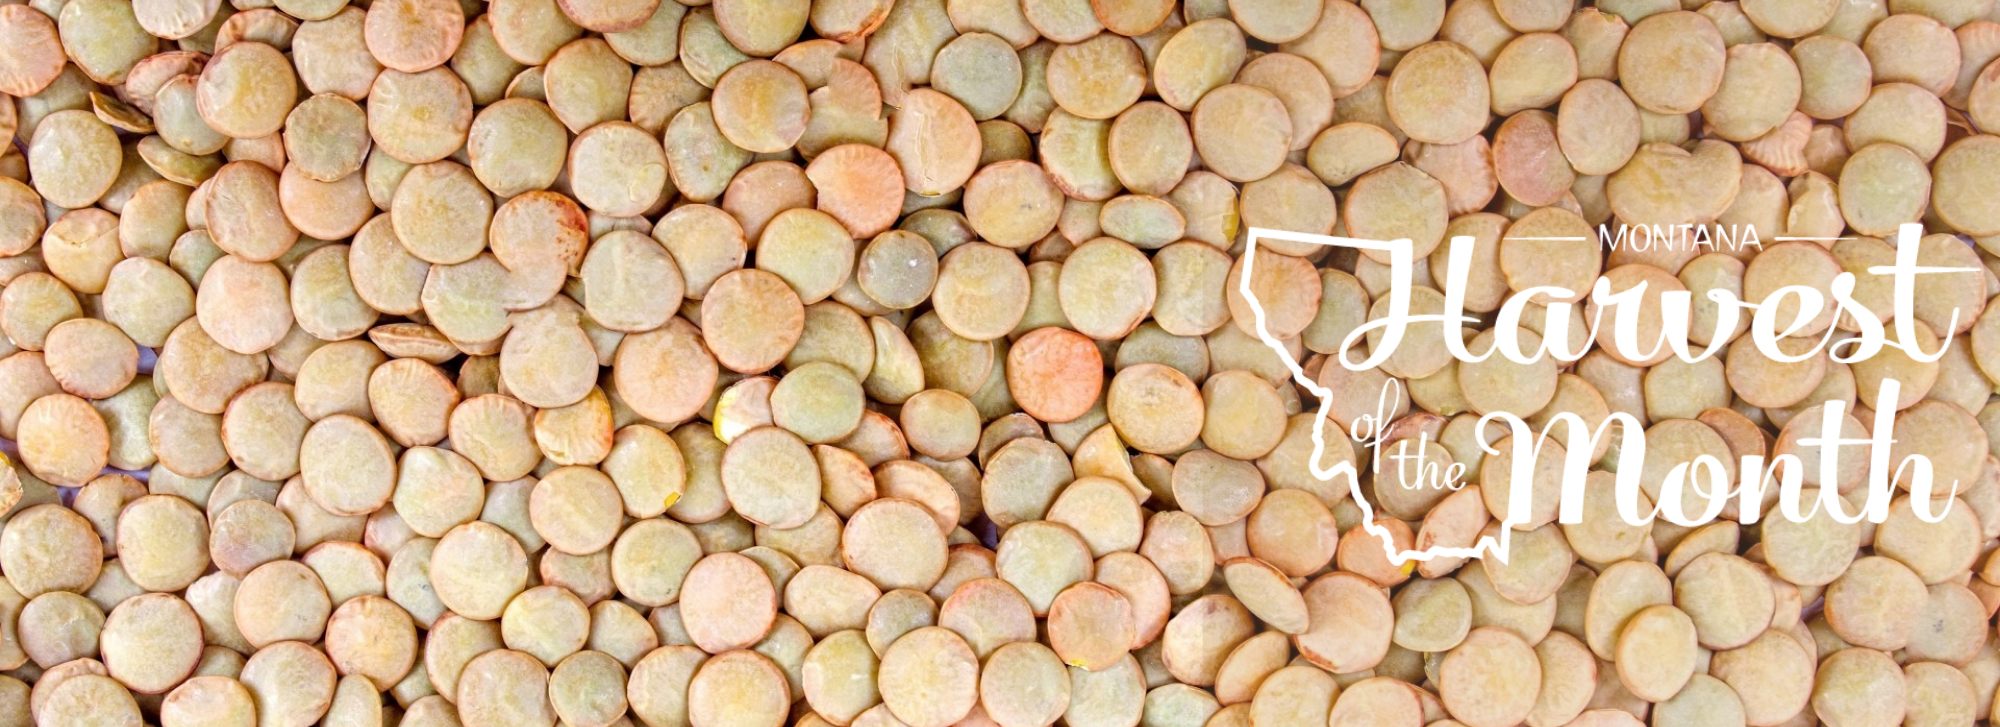 Photo of light colored lentils with the Harvest of the Month logo